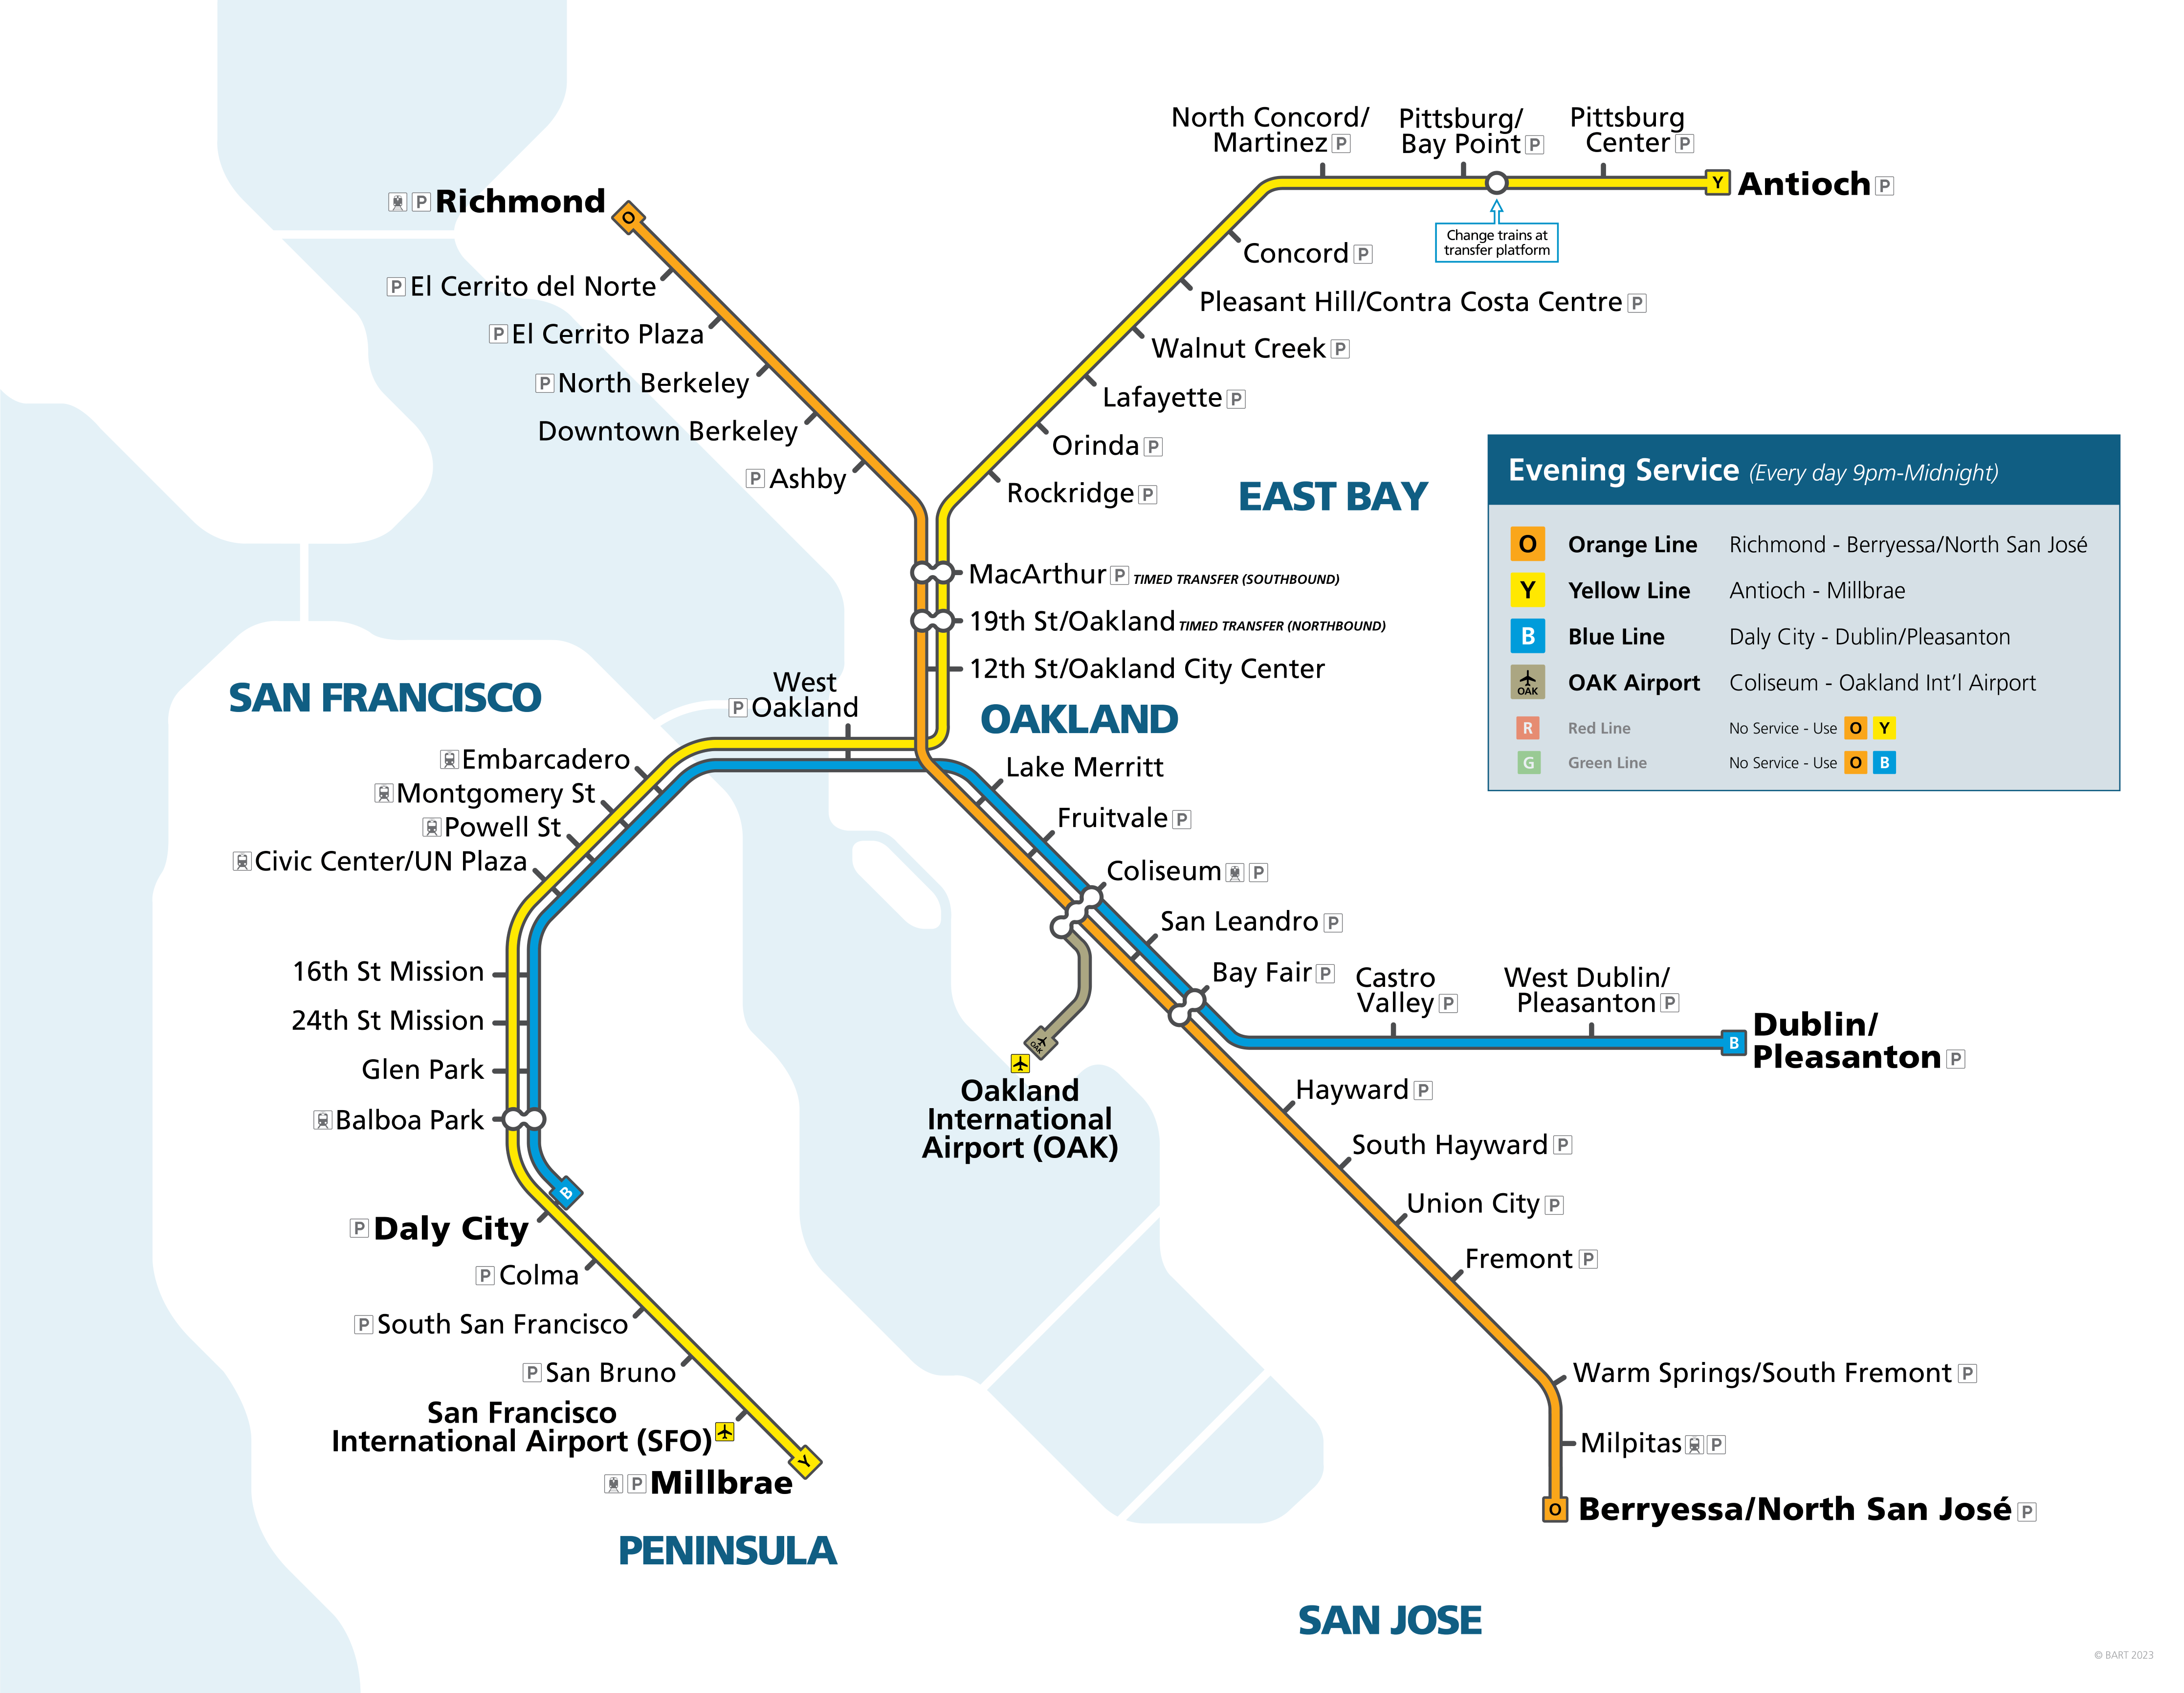 System Map - 9pm-Midnight 3-Line Service